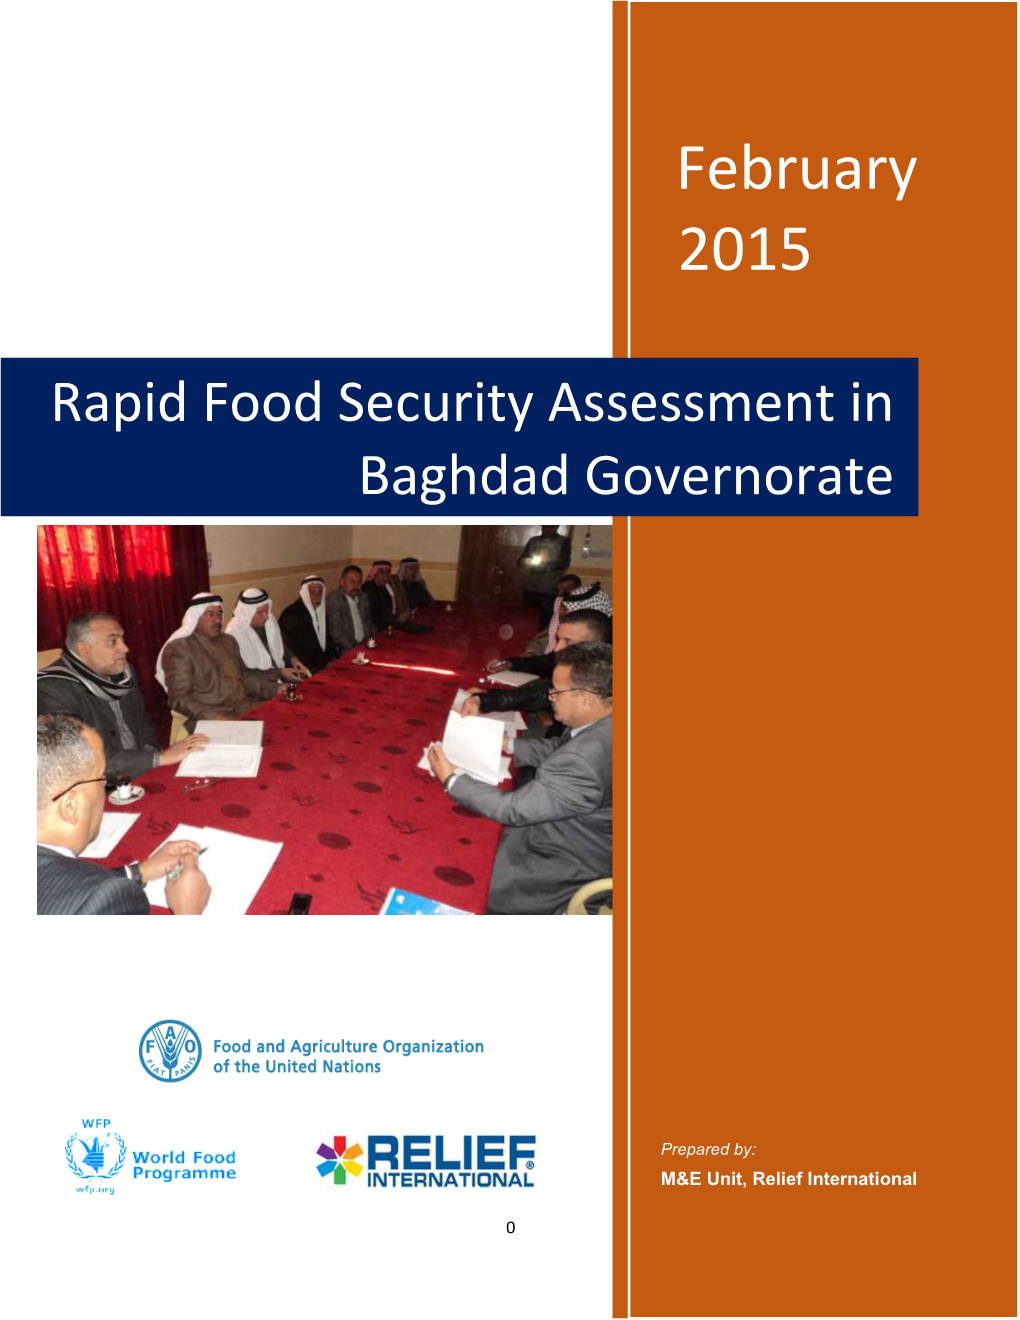 Rapid Food Security Assessment in Baghdad Governorate